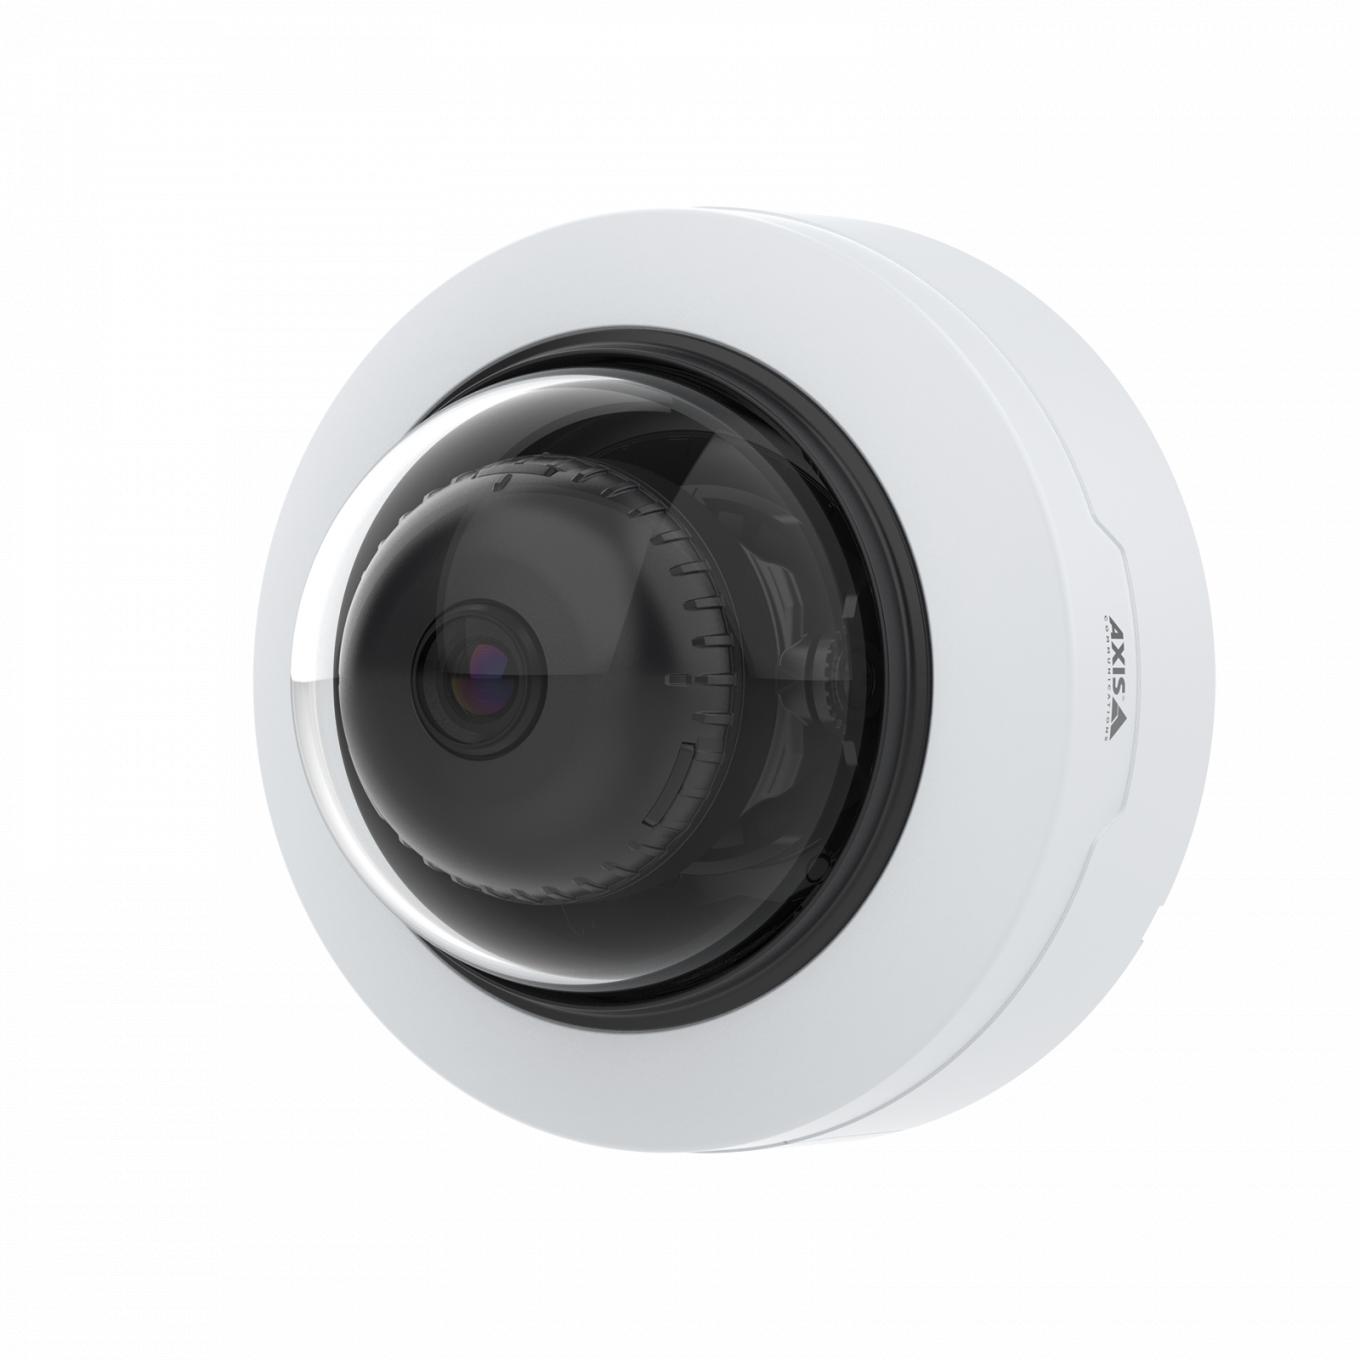 AXIS P3265-V Dome camera mounted on wall from left